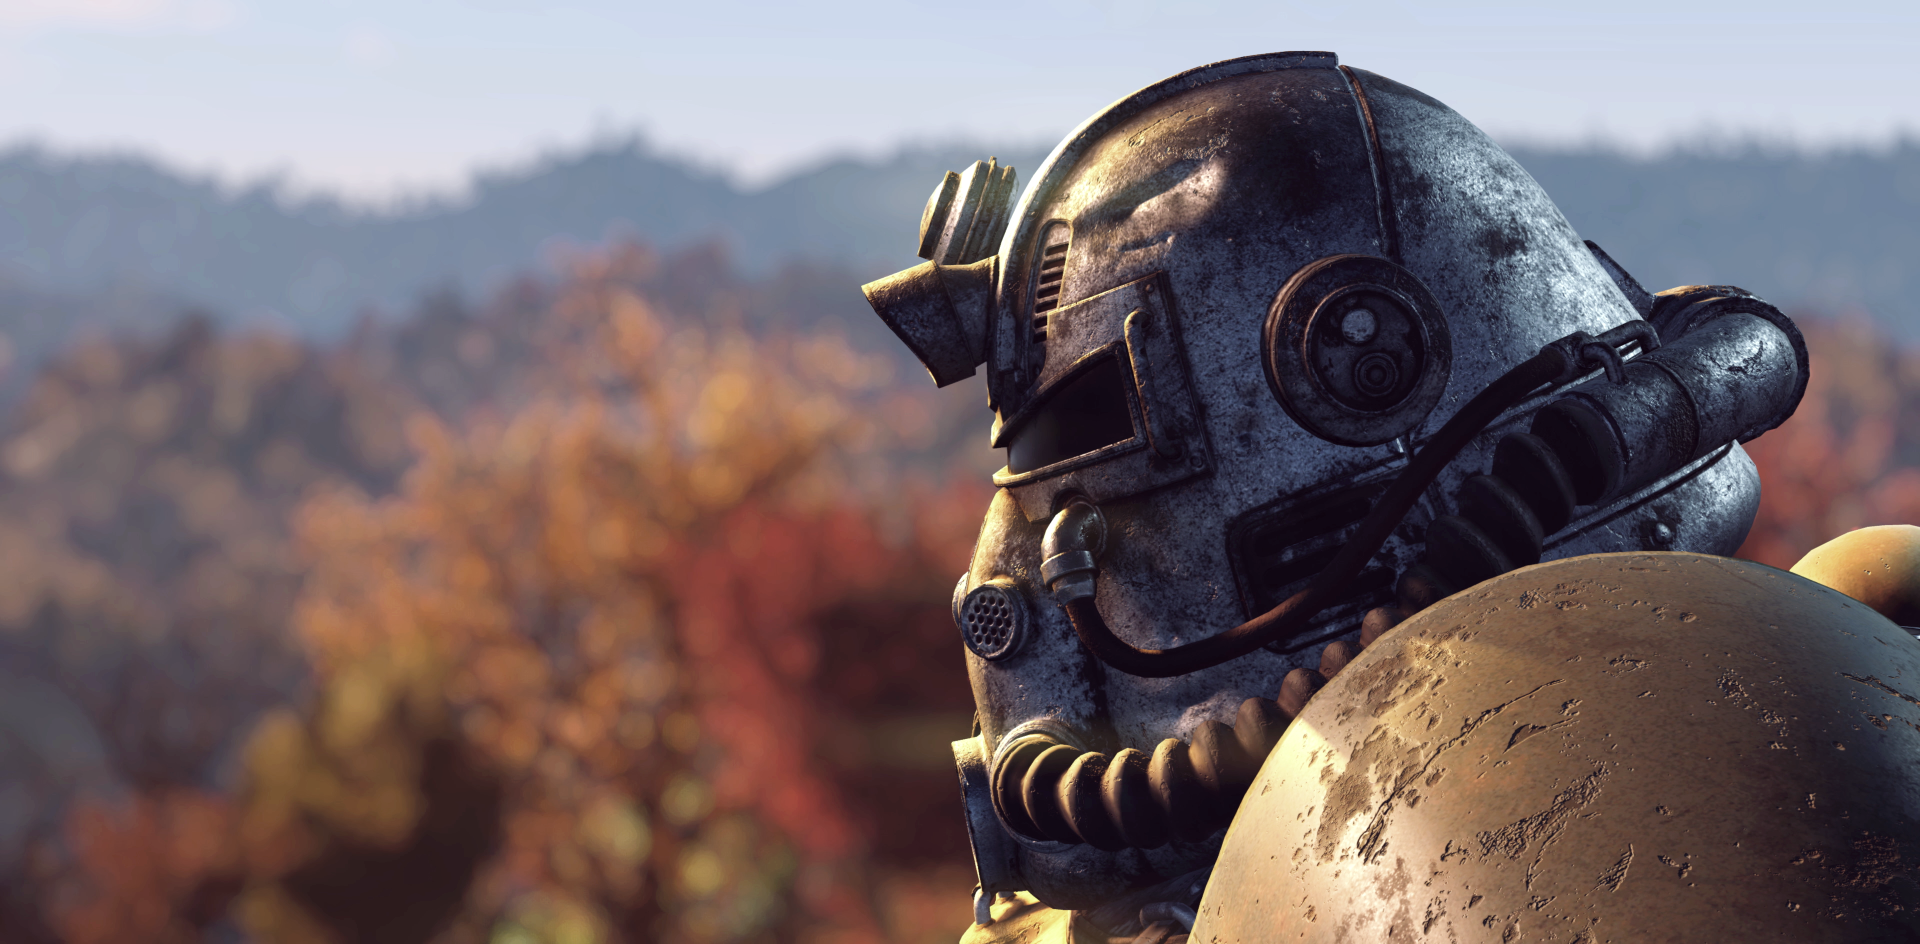 Even the first Fallout game is receiving an influx of players on Steam